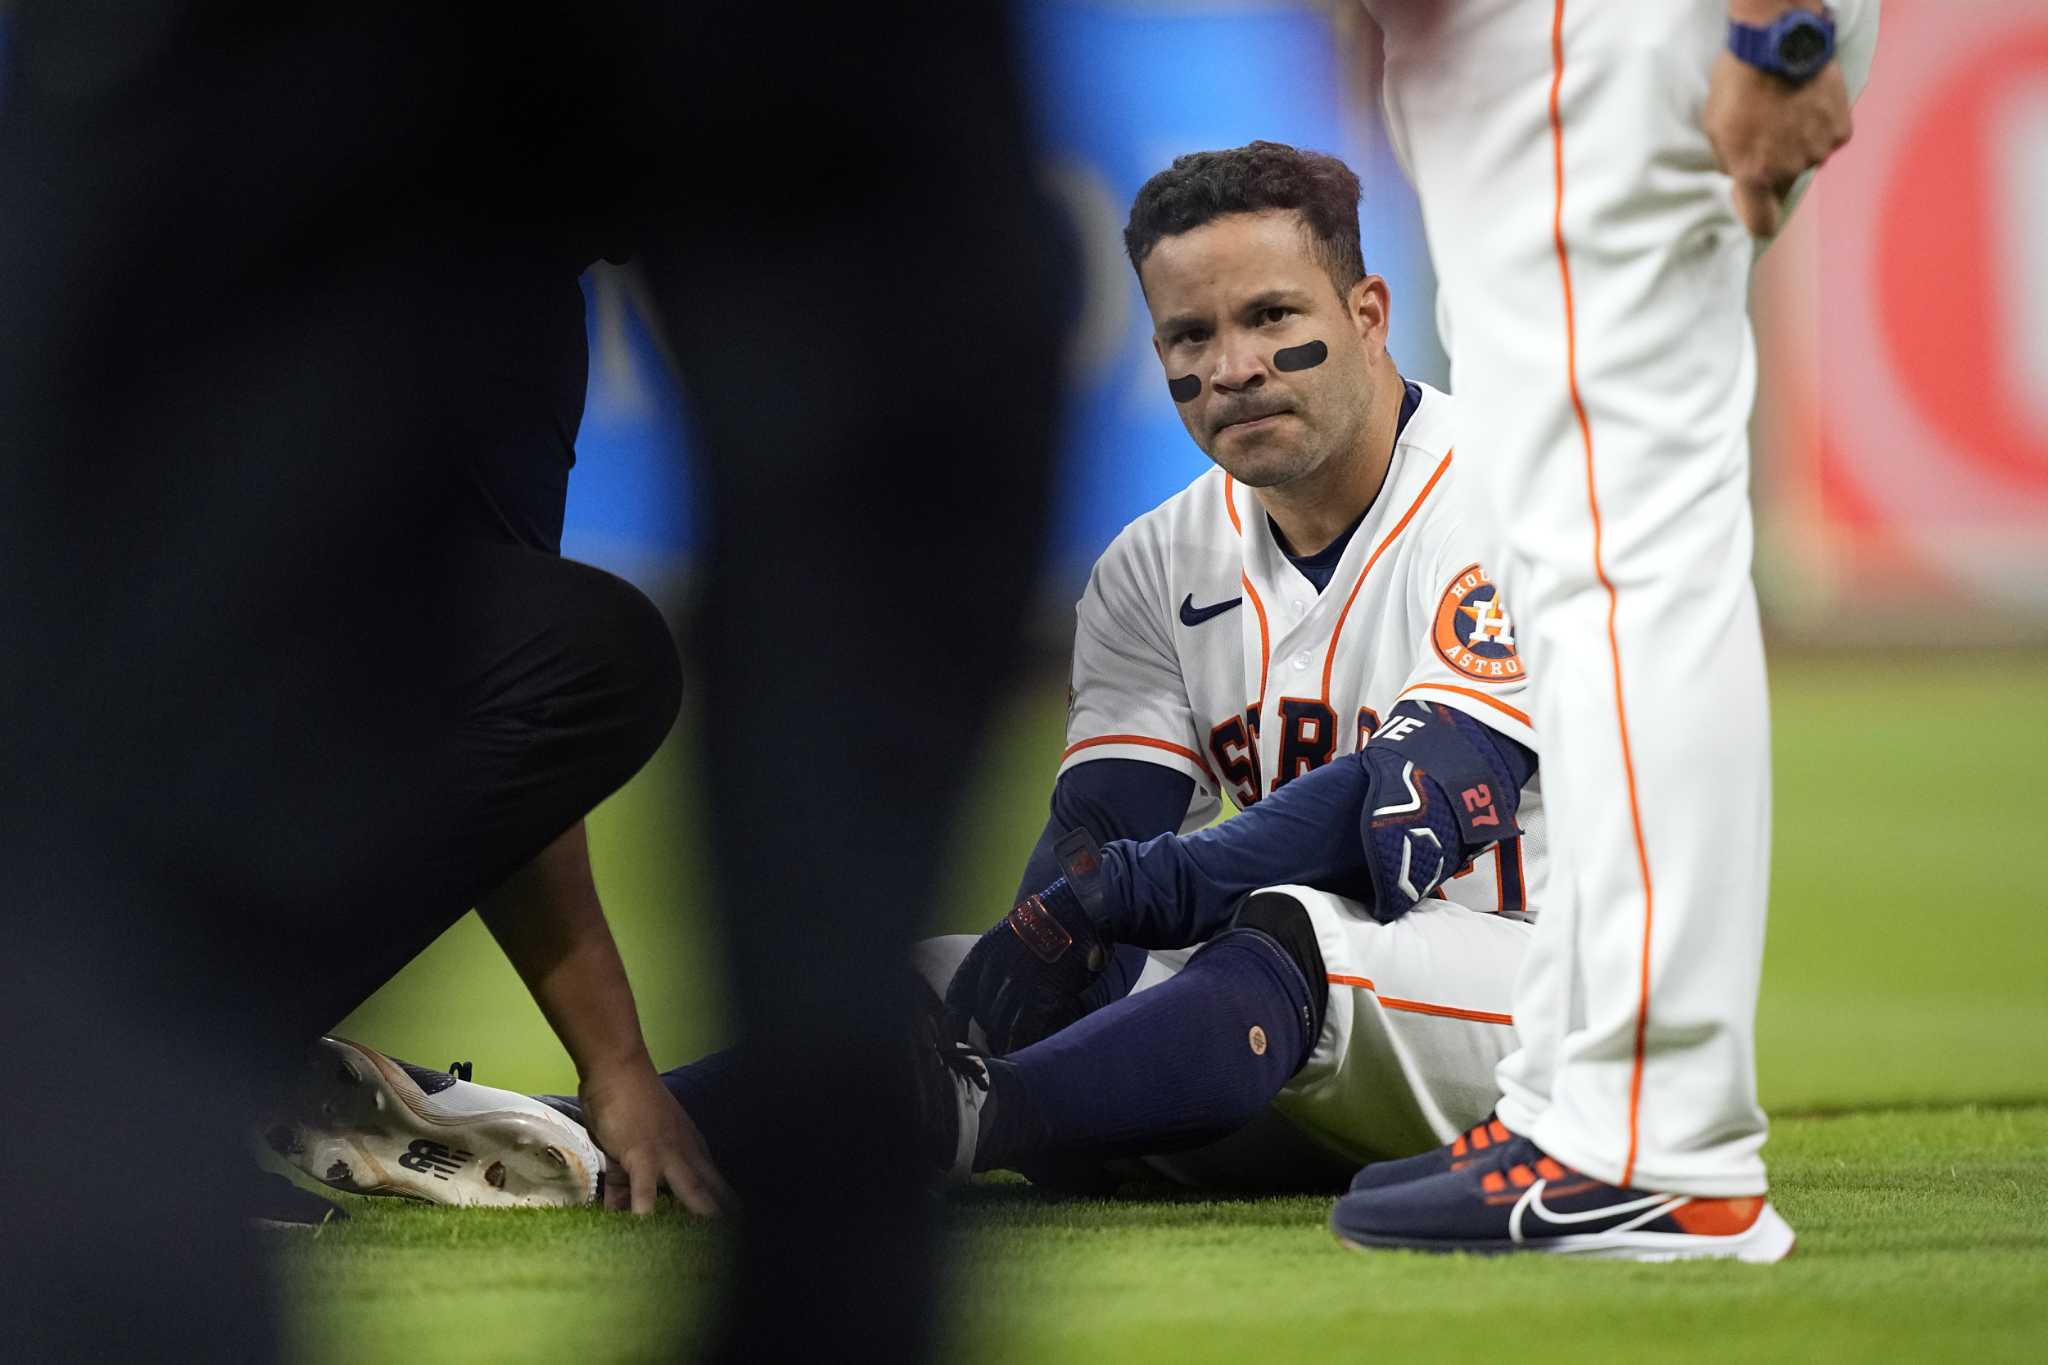 Despite age and injury, José Altuve is flourishing at the plate